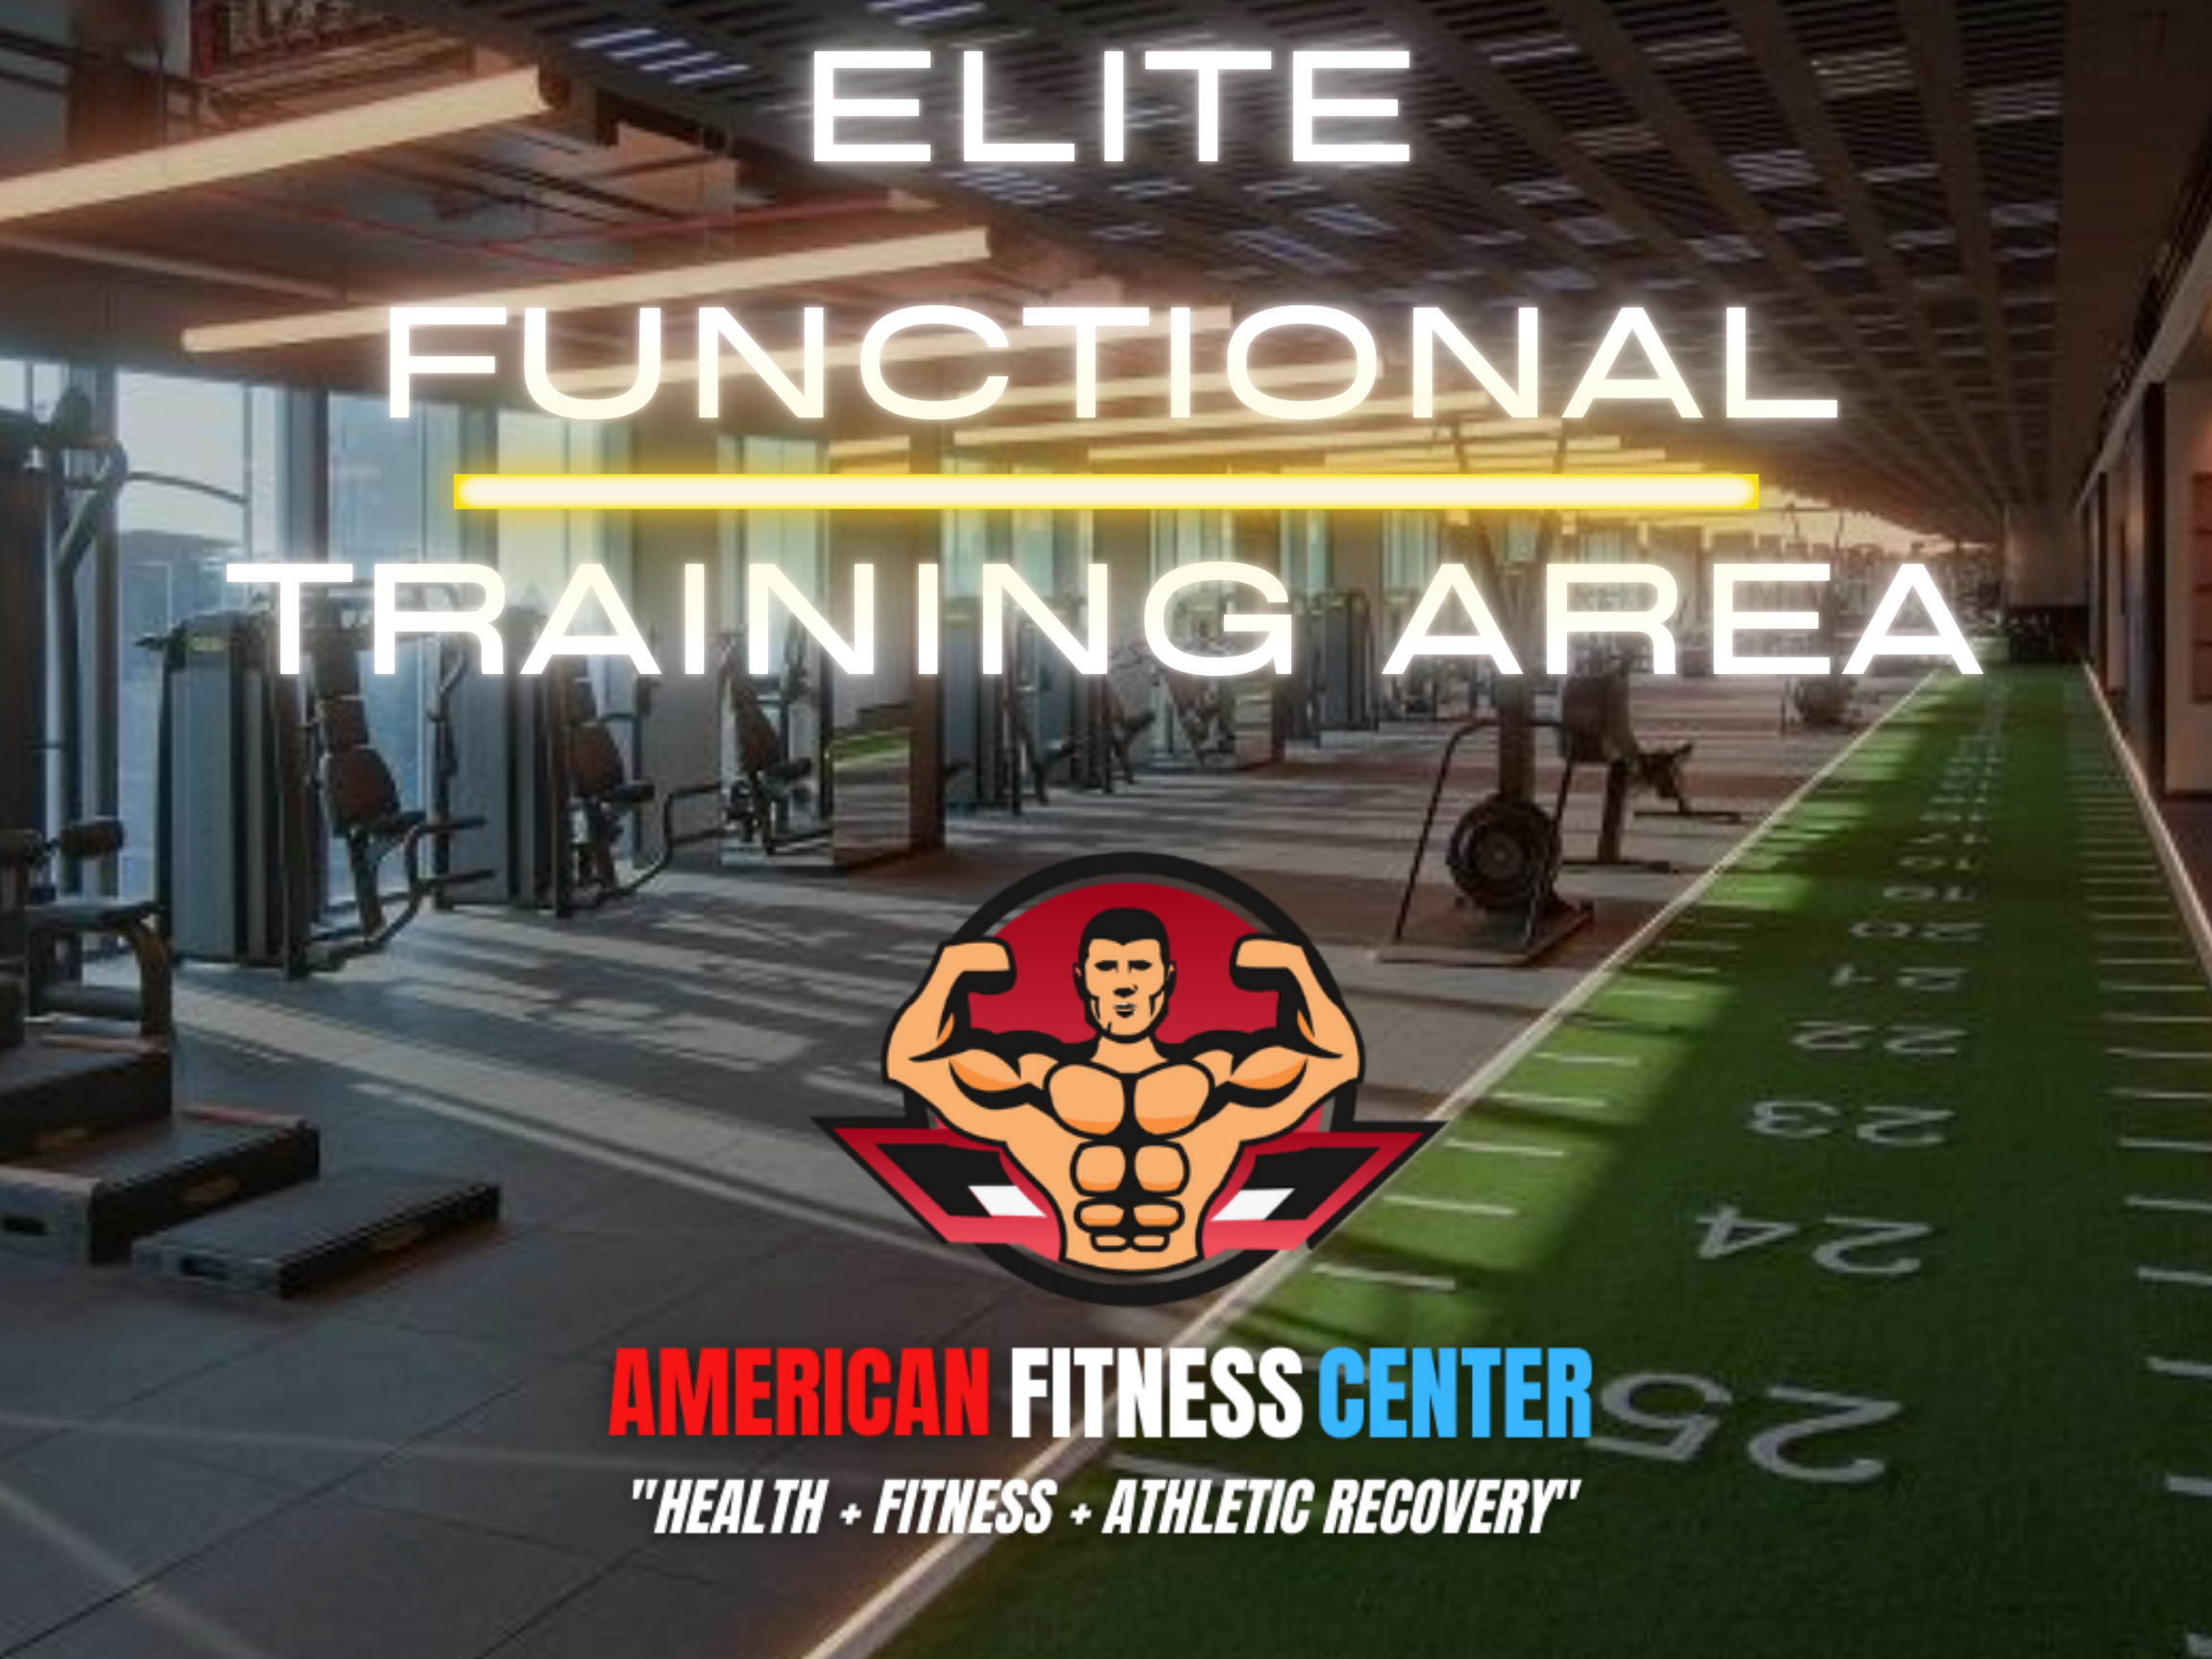 Elite Functional Turf Training Center Near Me in Roswell, GA - 24 Hour Luxury Gym - American Fitness Center West Roswell